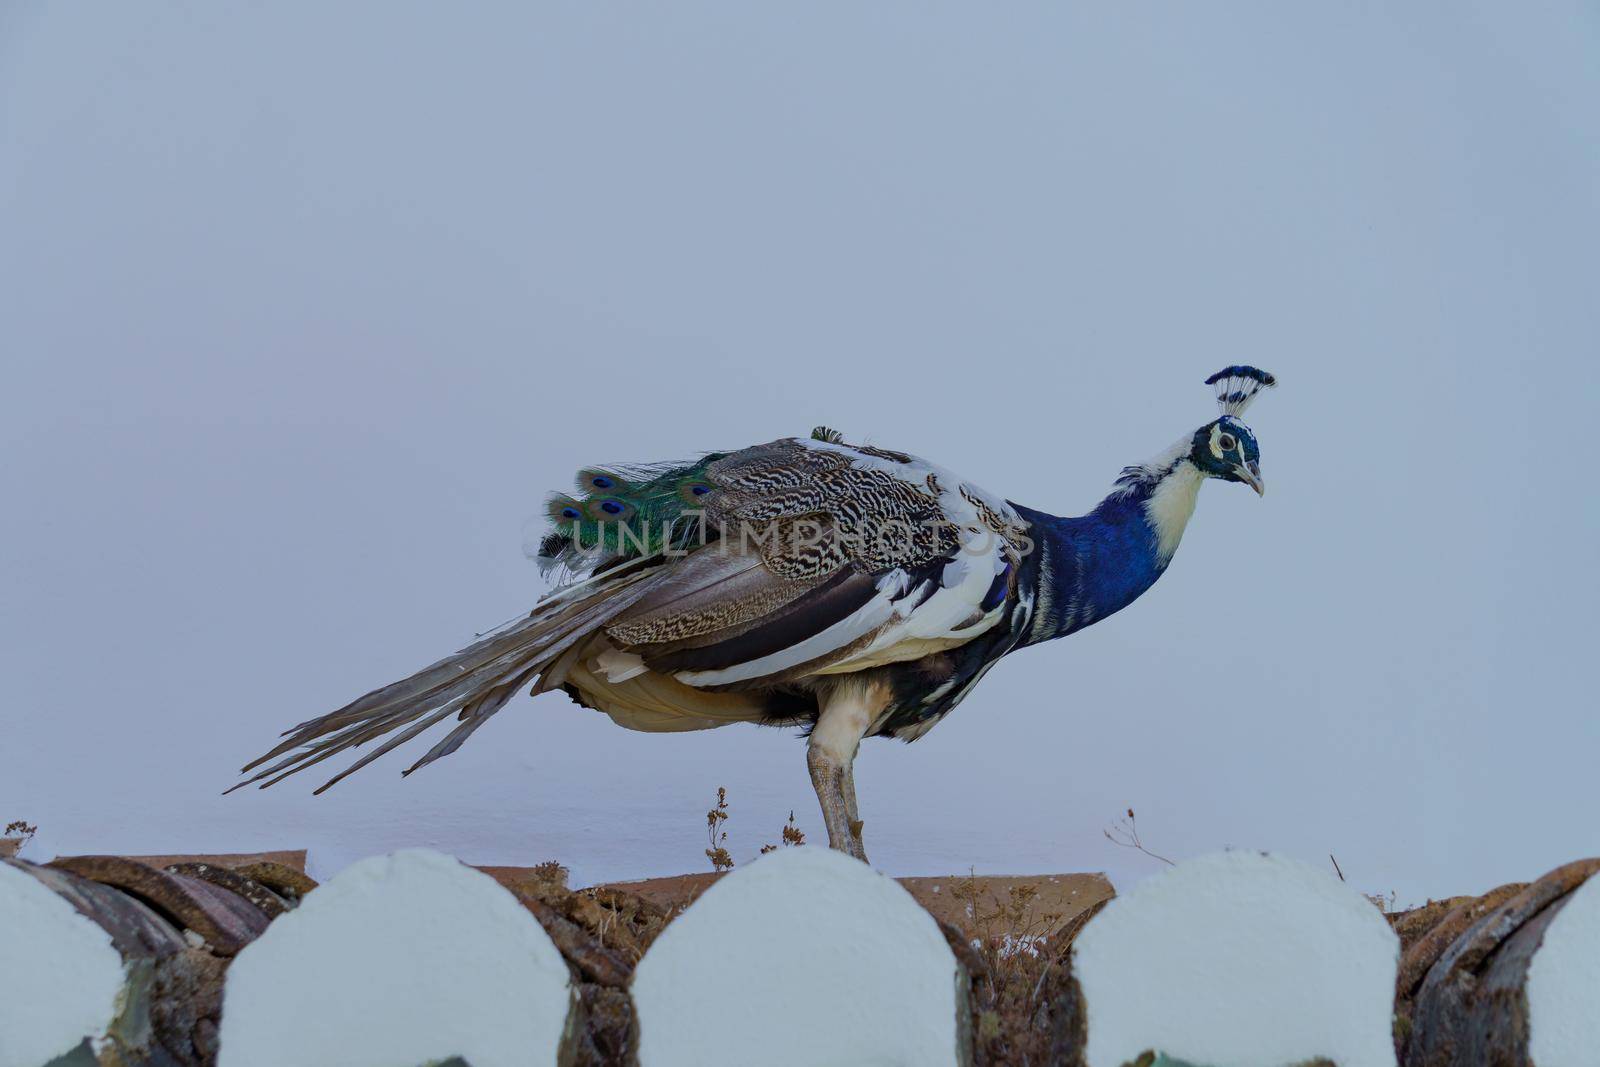 male peacock perched on a rooftop by joseantona